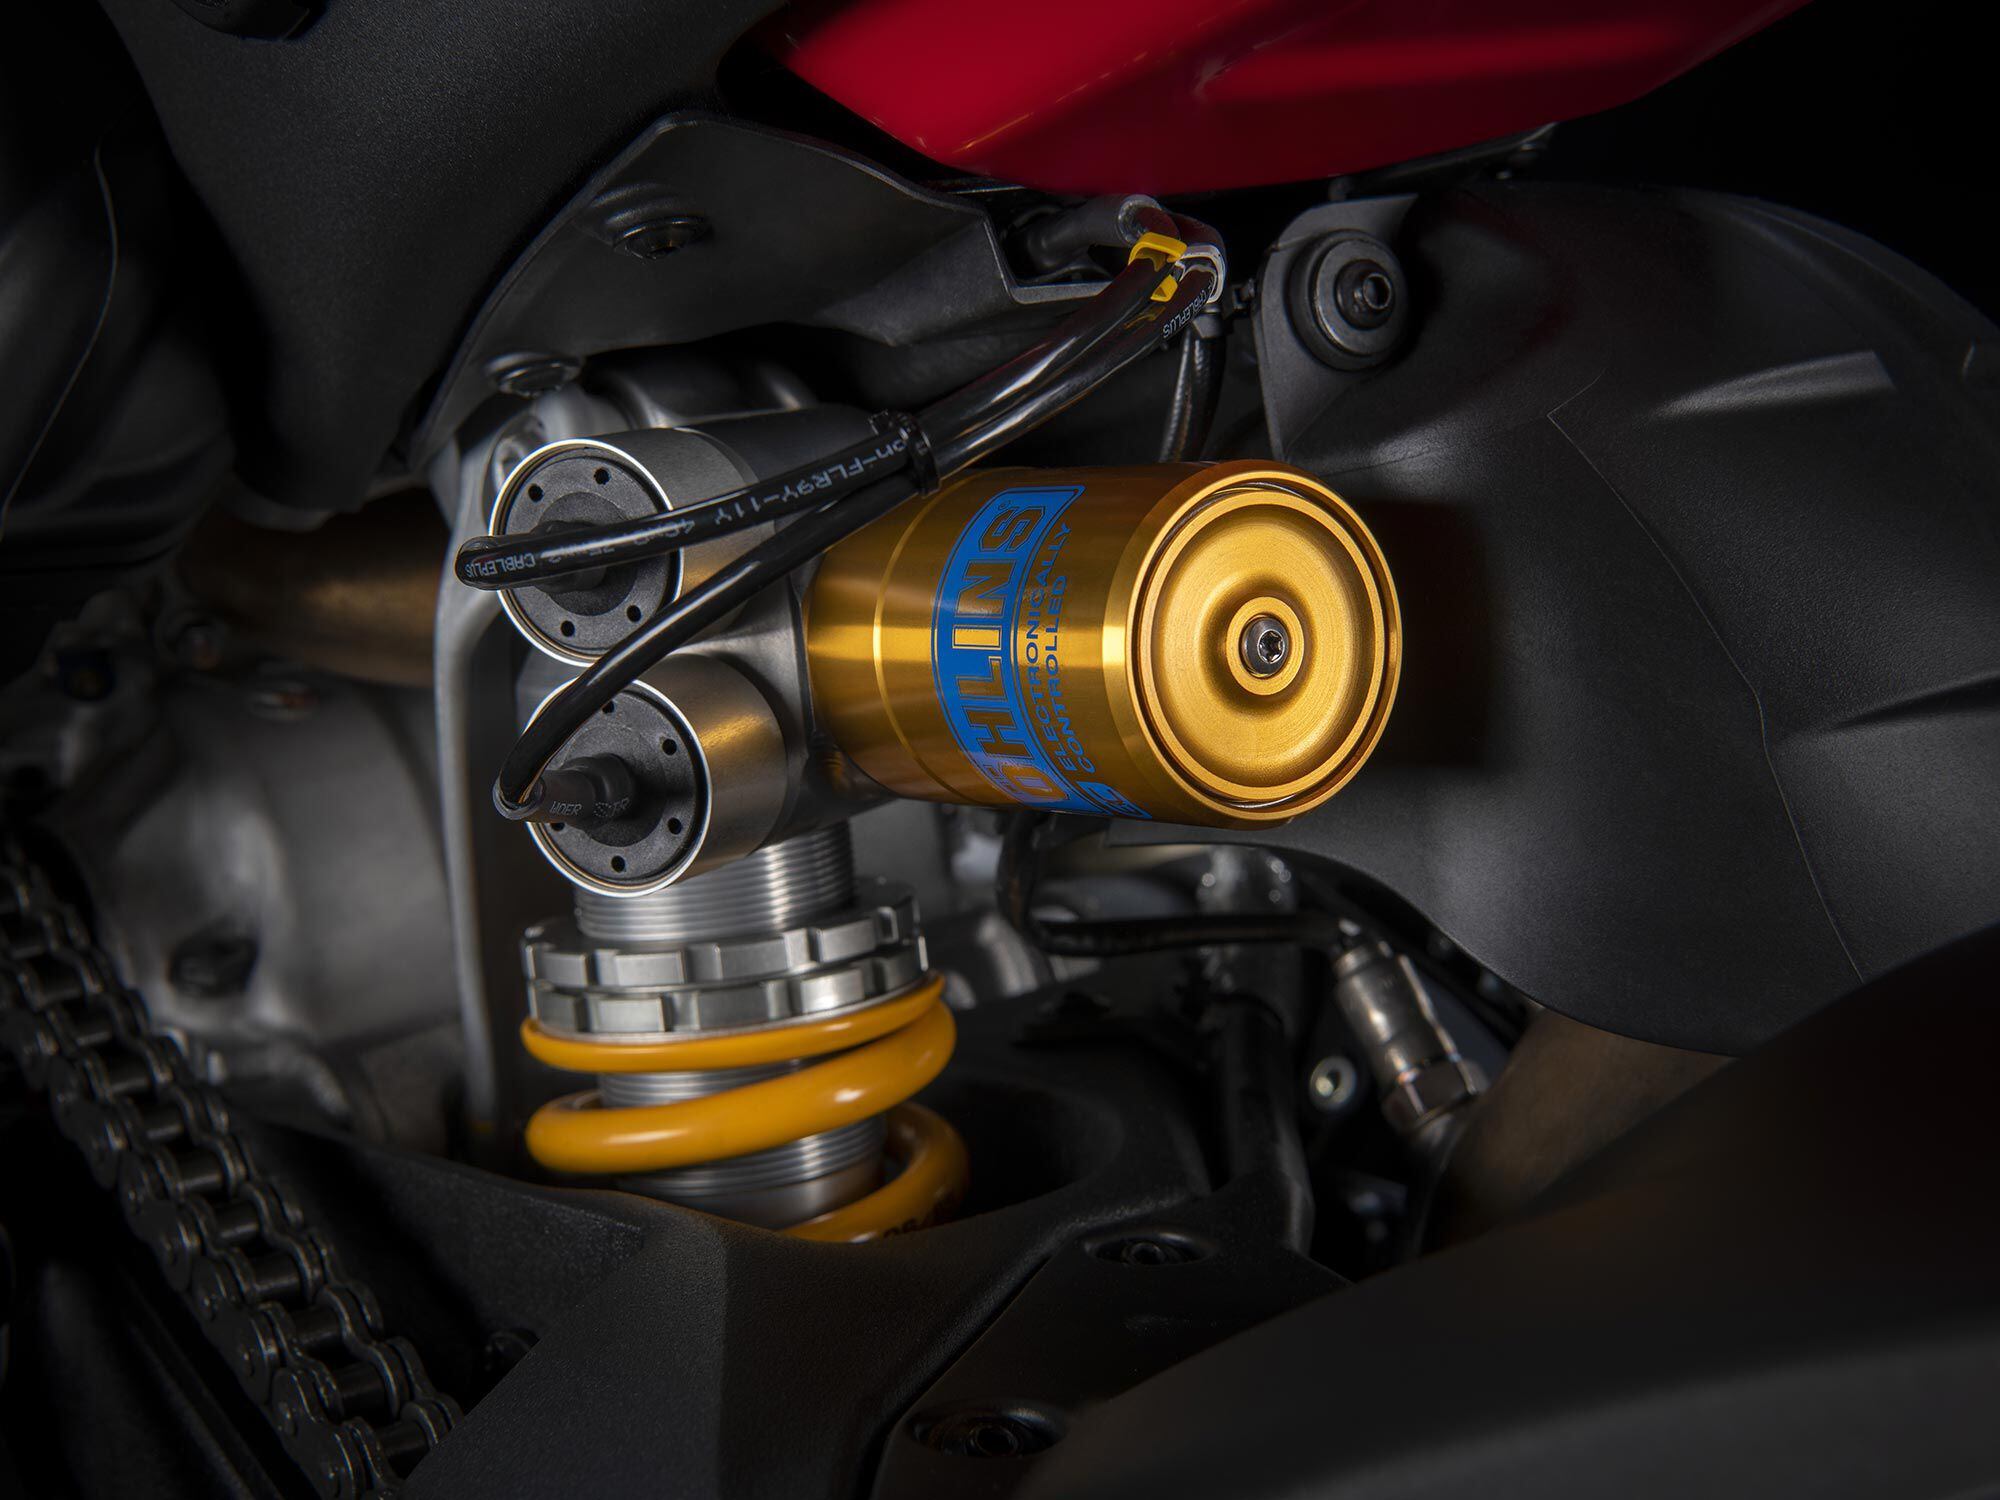 On the V4 S, the Panigale benefits from electronically adjustable Öhlins suspension front and rear.